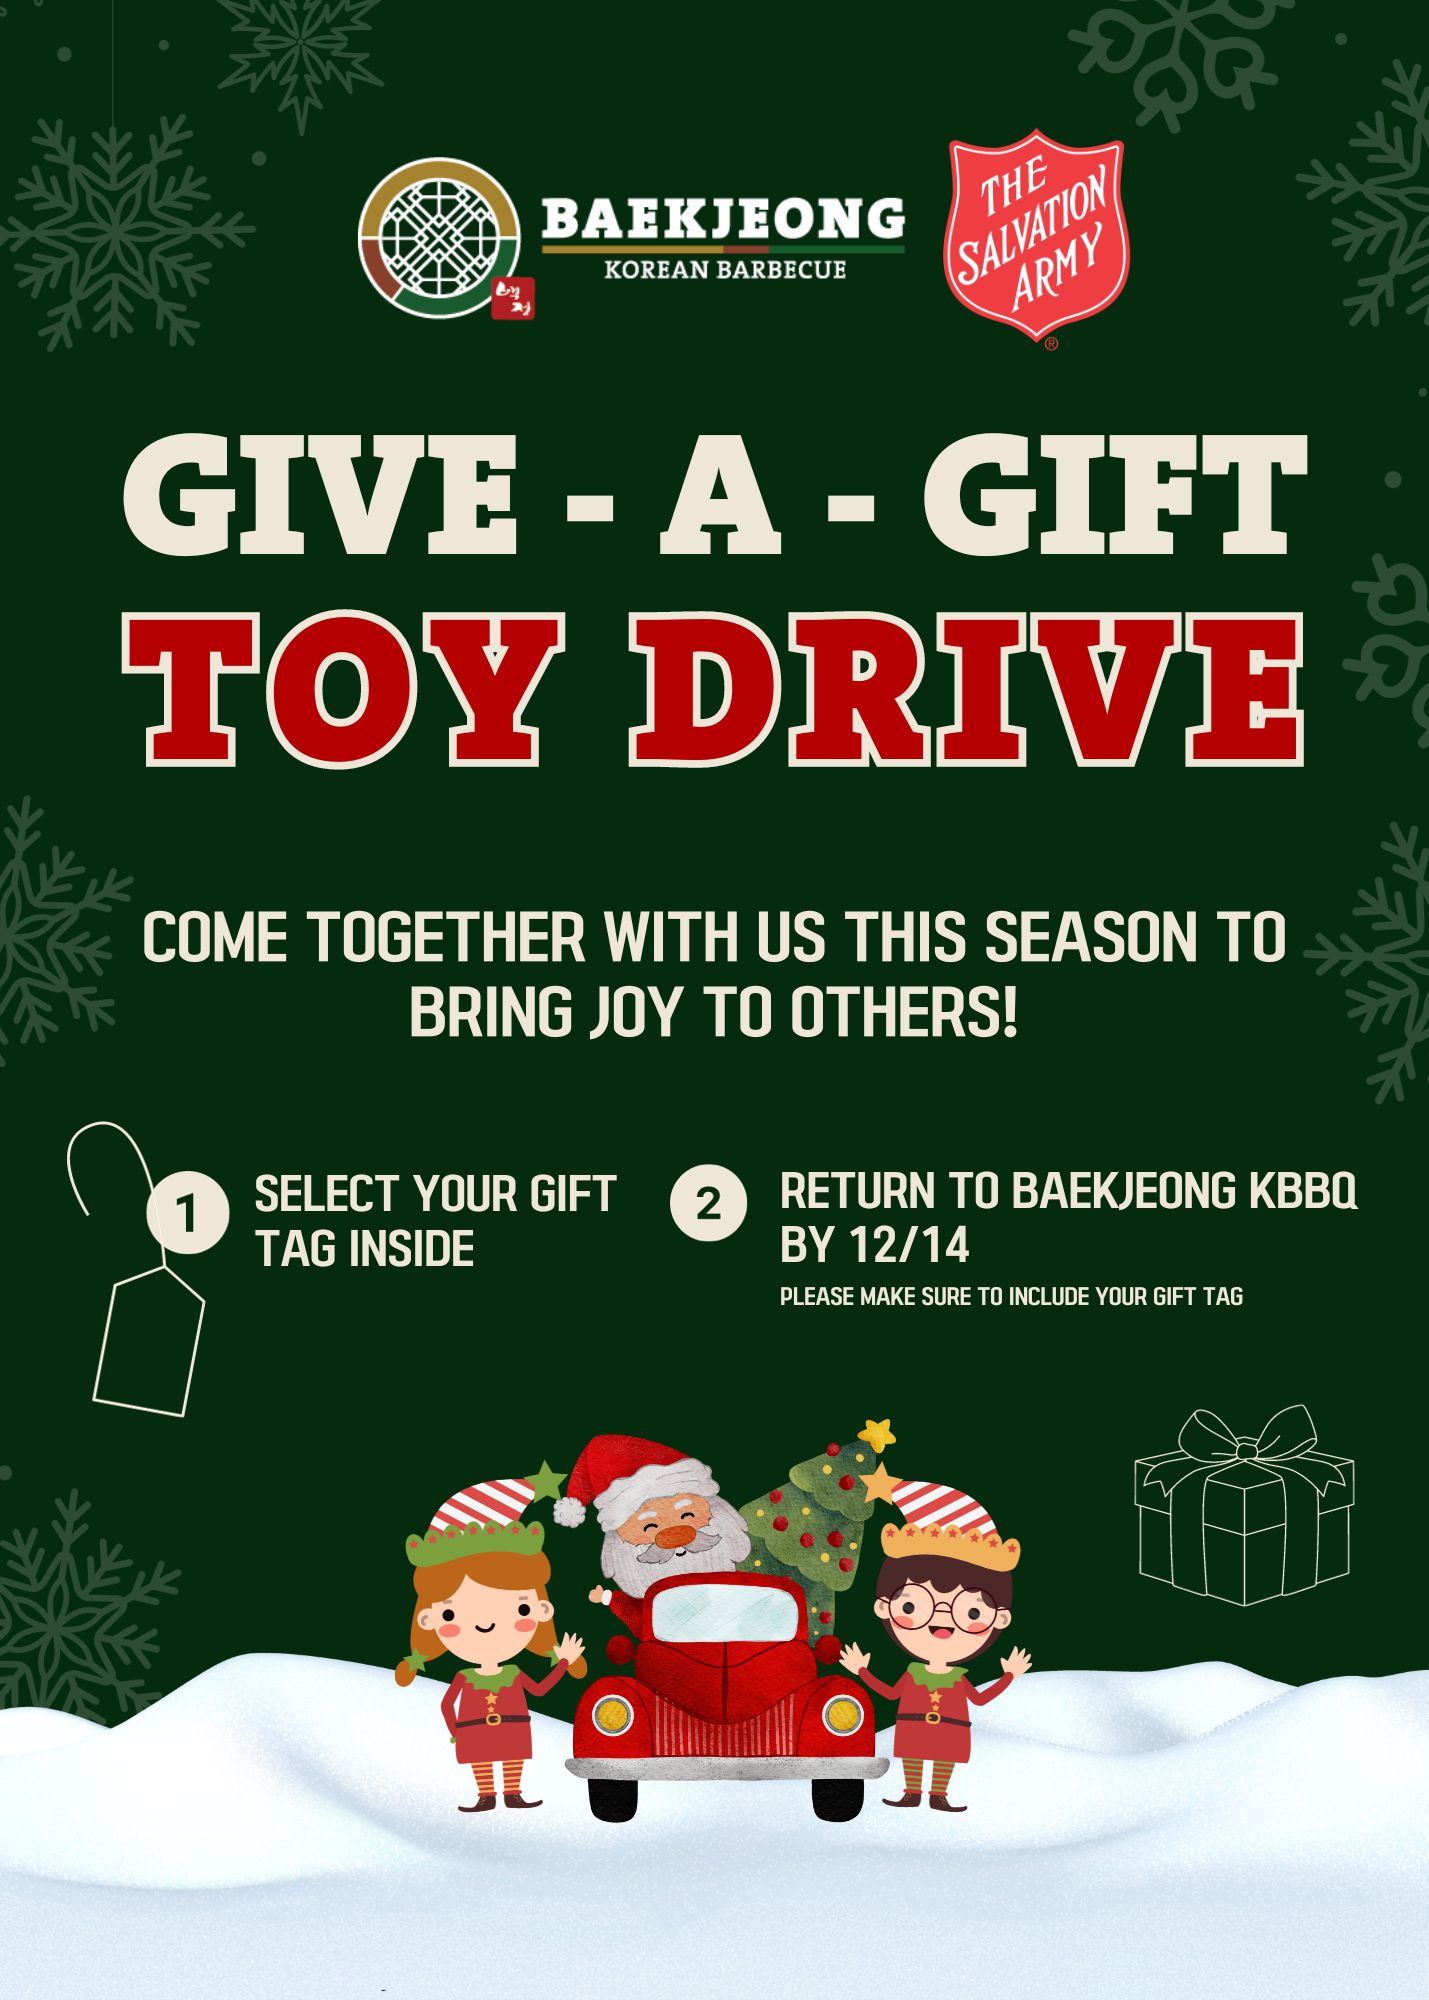 Give-a-gift Toy Drive: Come together with us this season to bring joy to others!